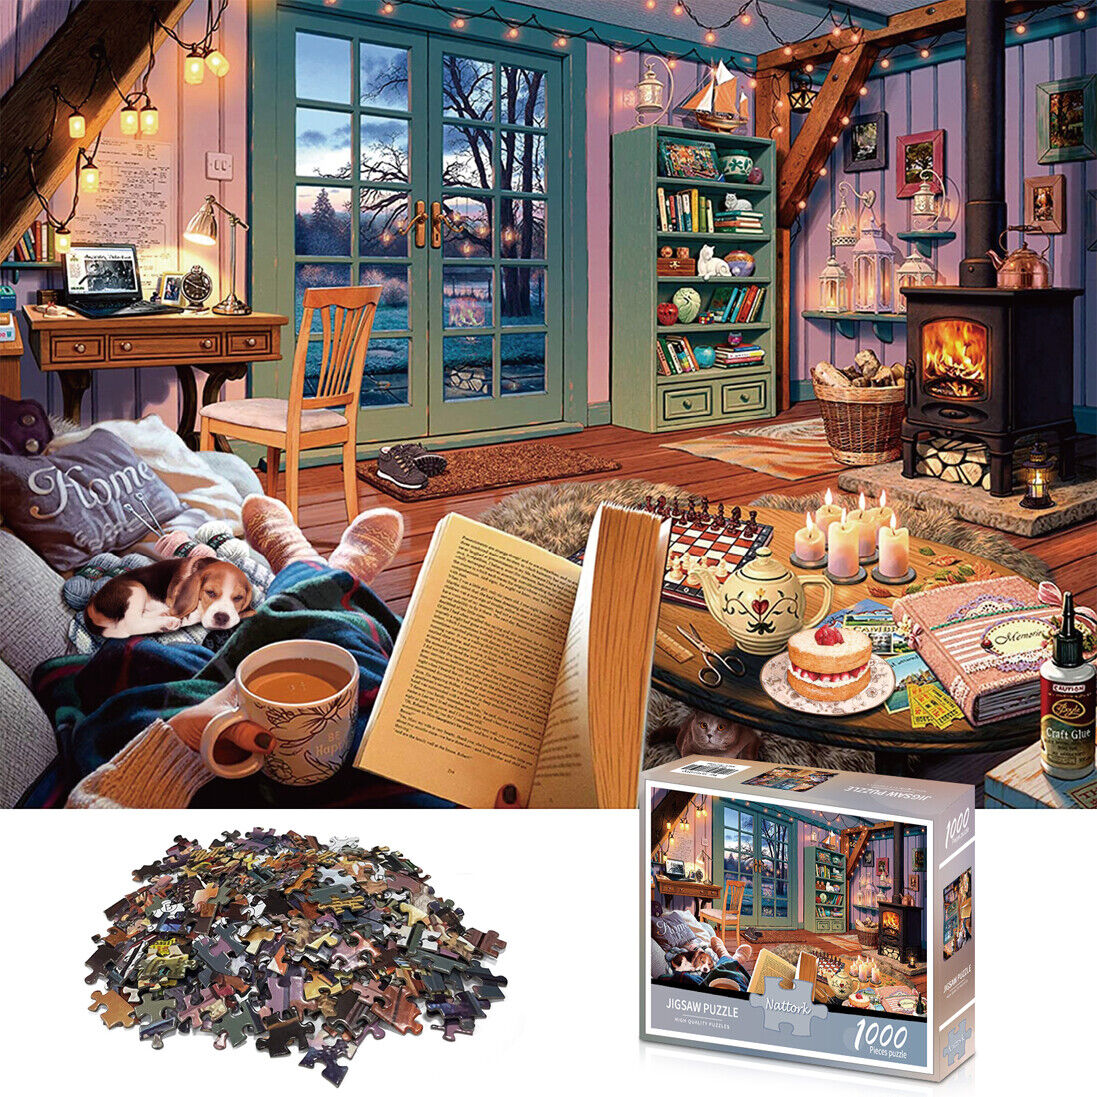 SHAREWIN 1000 Pieces Jigsaw Puzzles for Adults Kids Difficult Holiday Gift